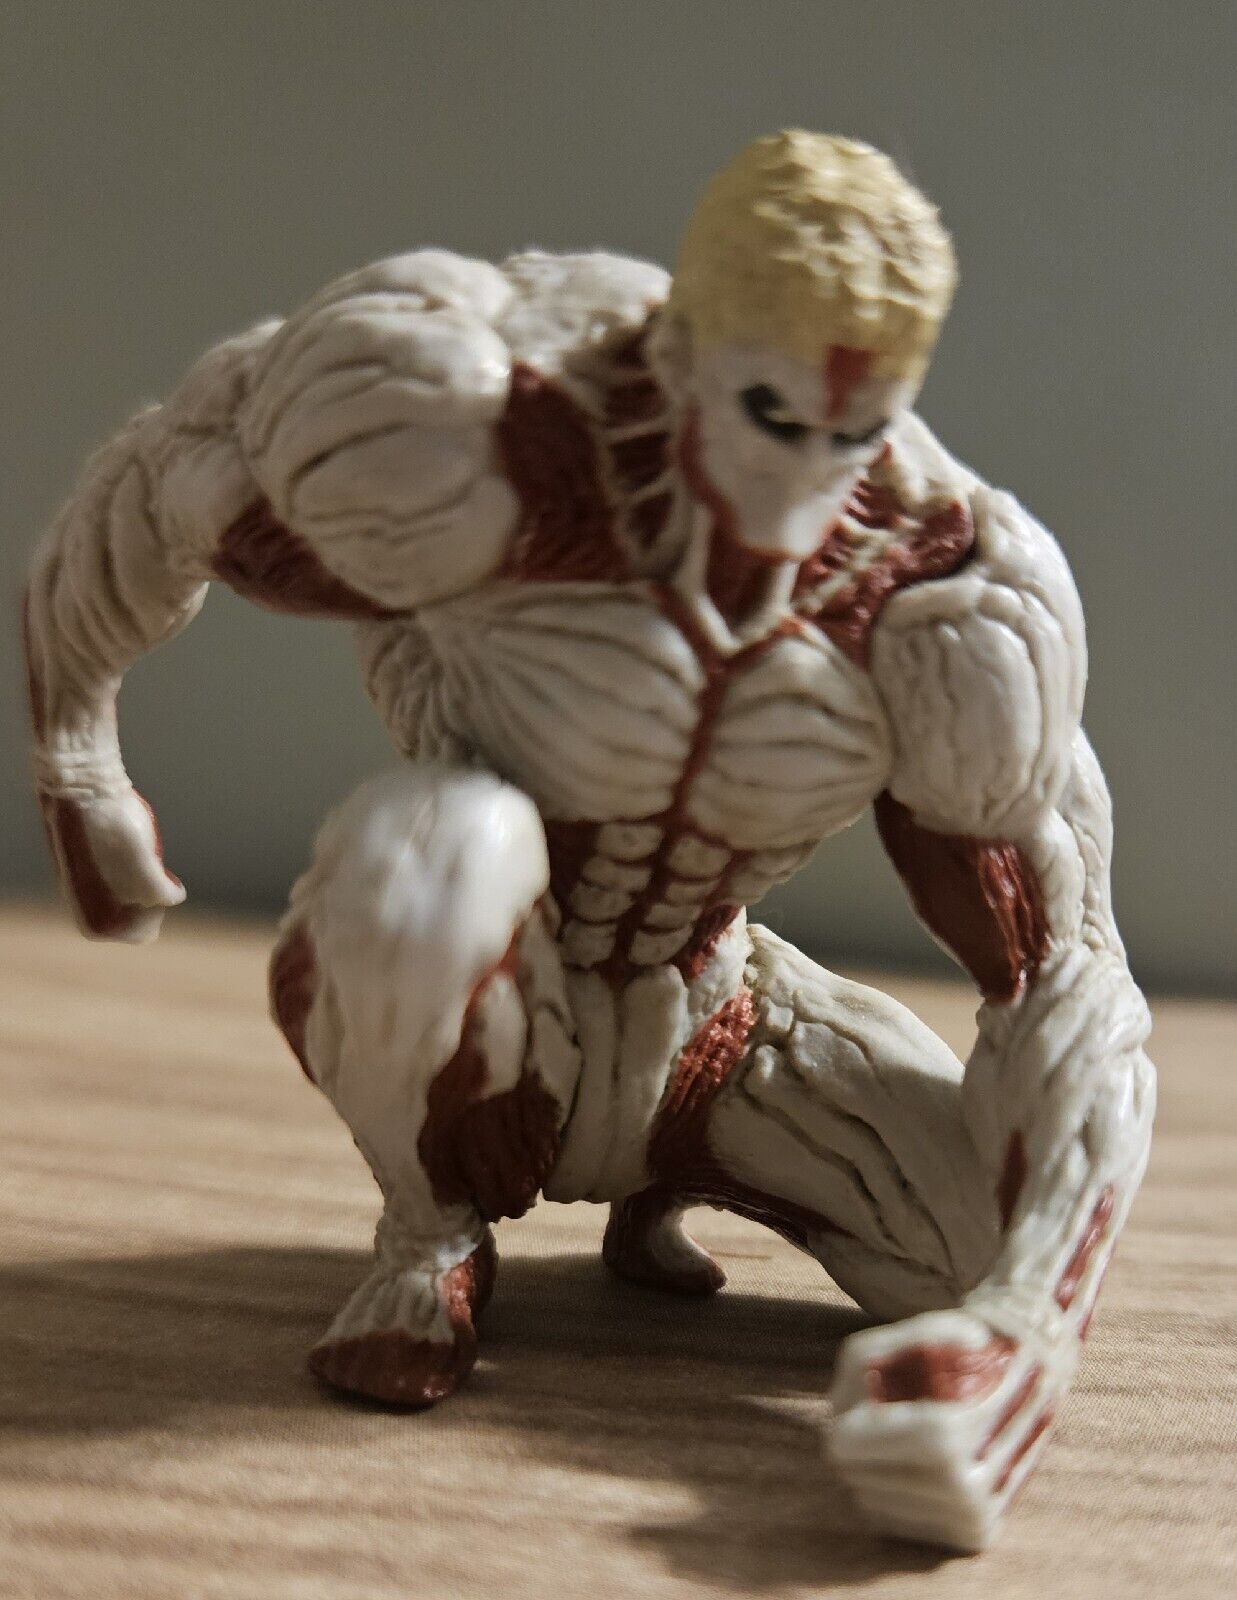 Attack On Titan Armored Titan Real Figure Collection Wave 2 Trading Figure Rare